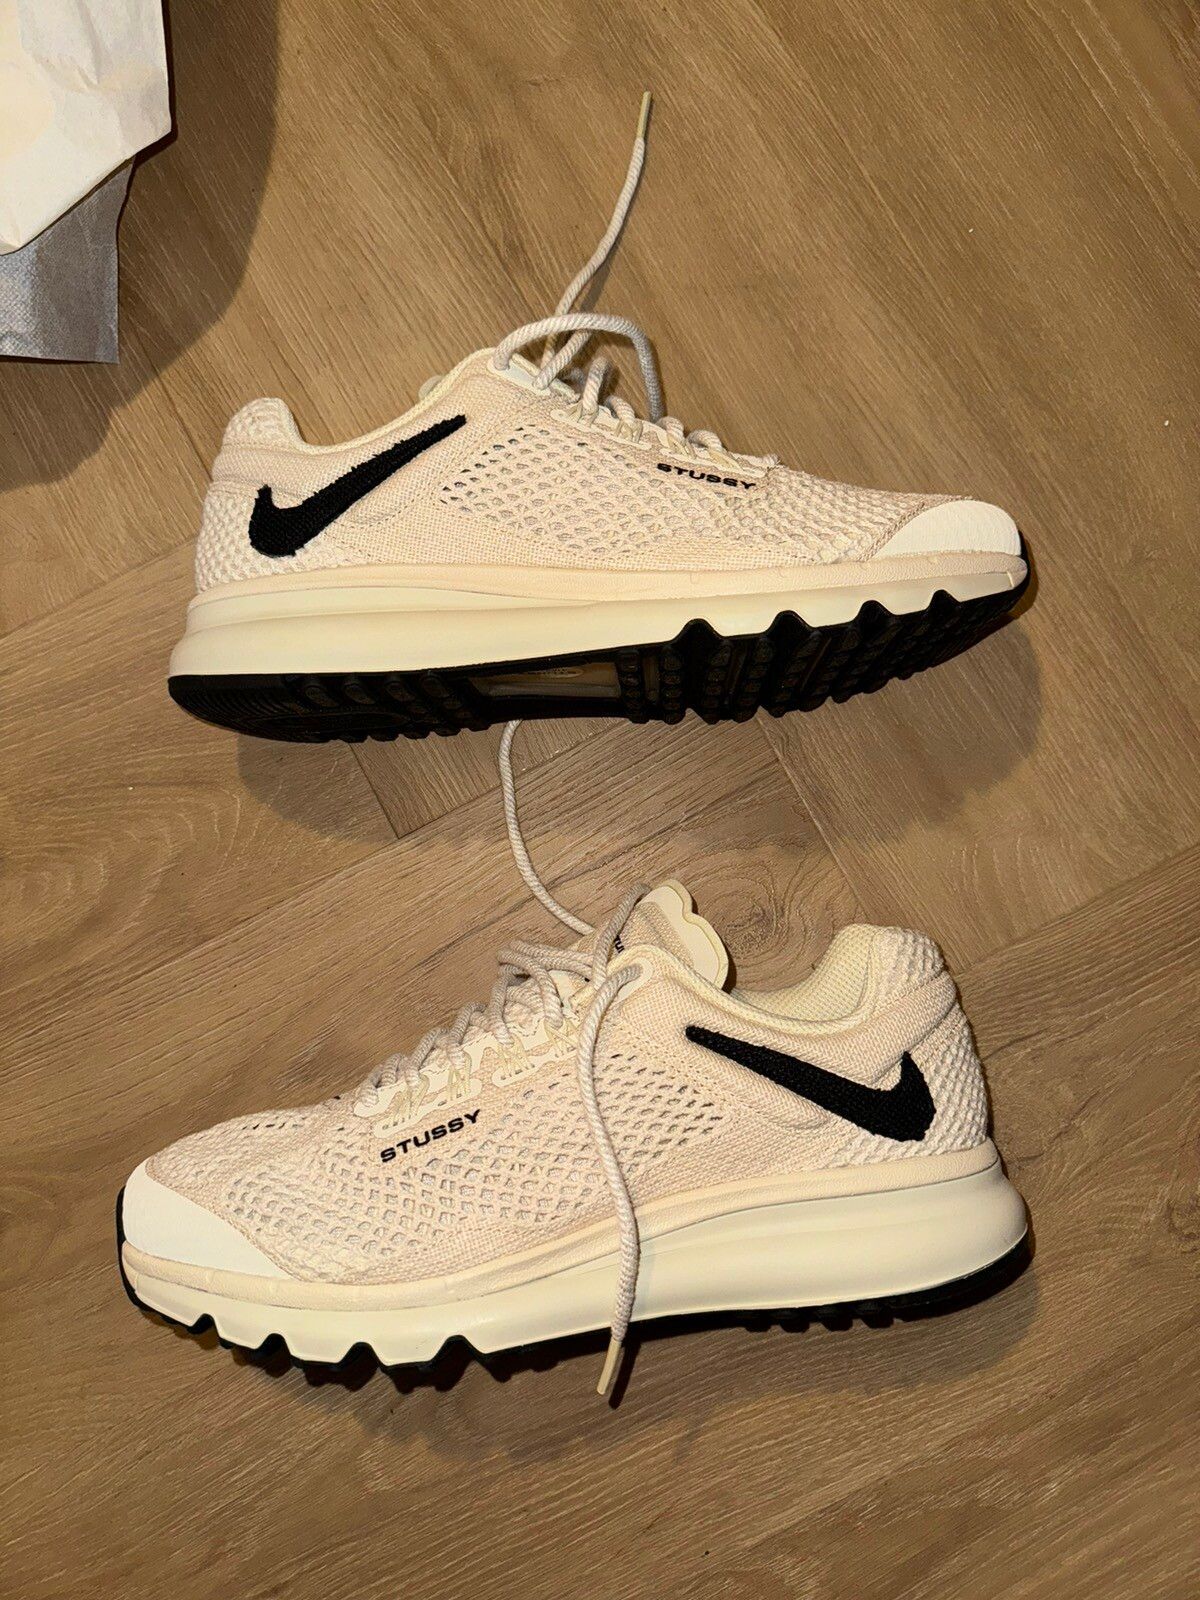 Pre-owned Nike X Stussy Nike Air Max 2013 Shoes In Fossil